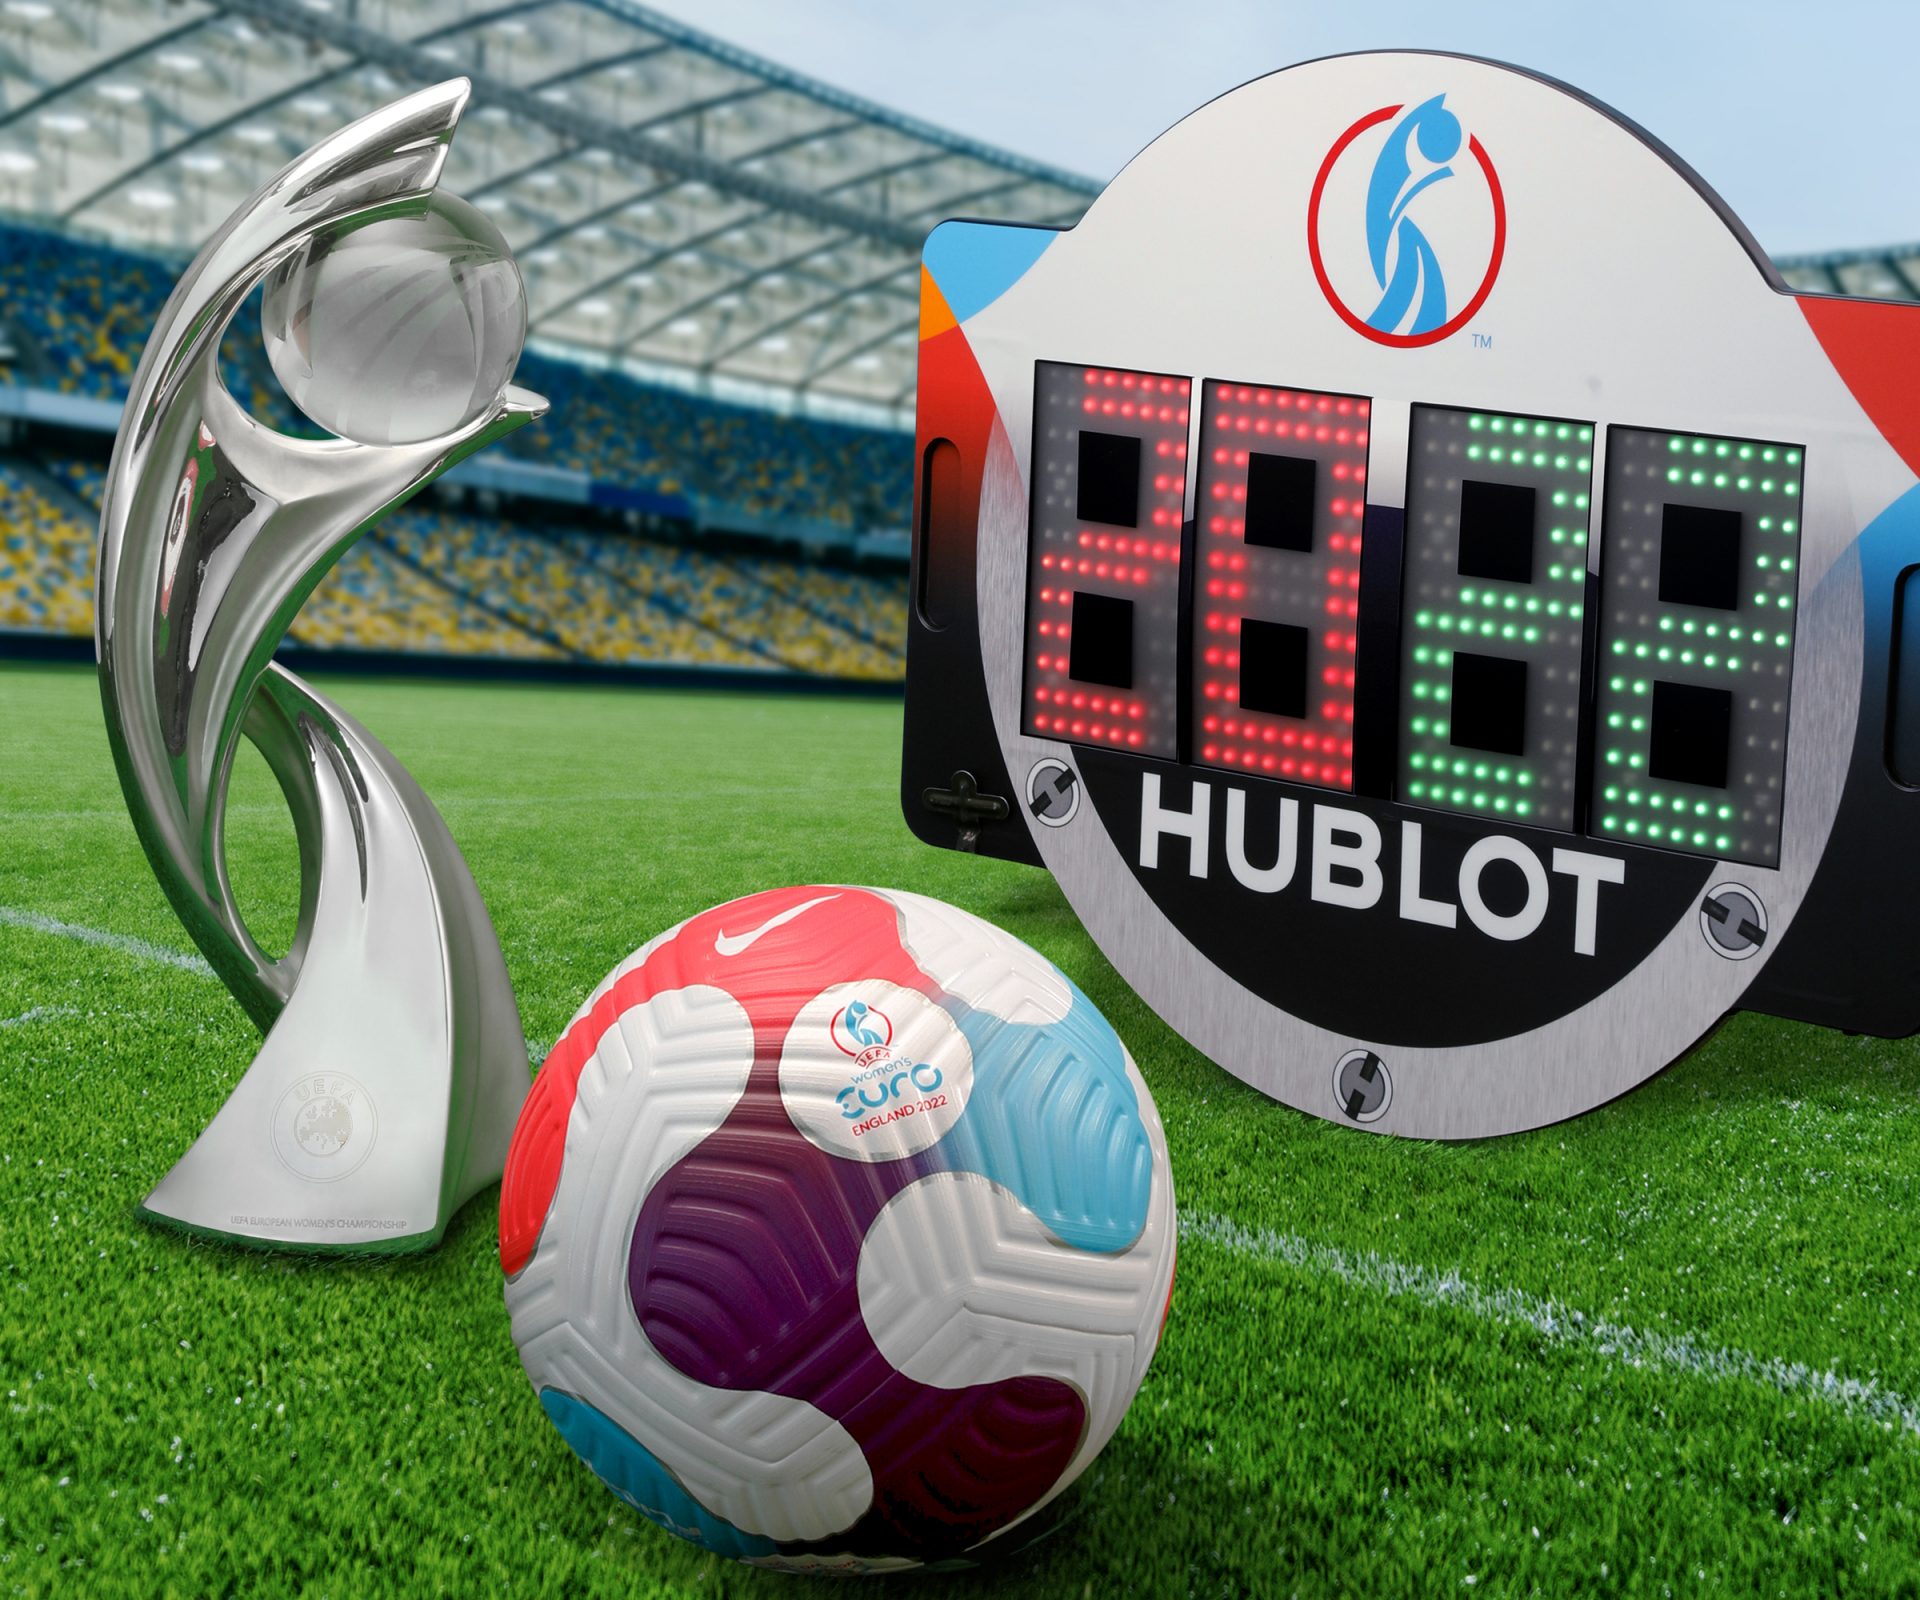 Keeping time: Hublot at the Uefa European Championship in France - SportsPro